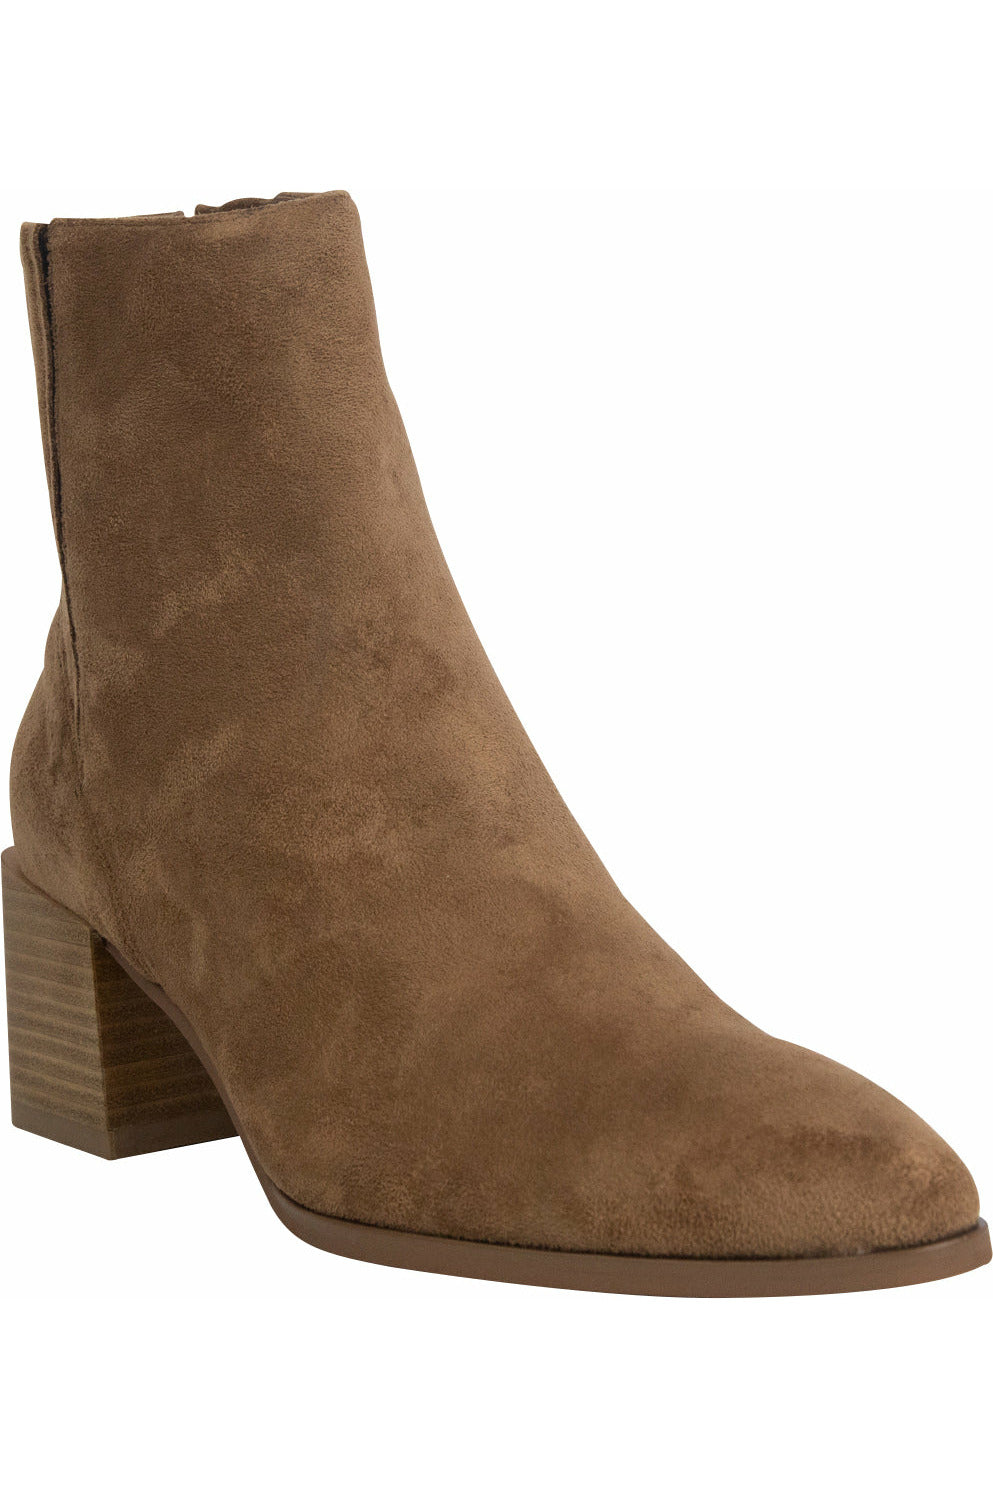 Isabella Paris Suede Ankle boot in Caramel